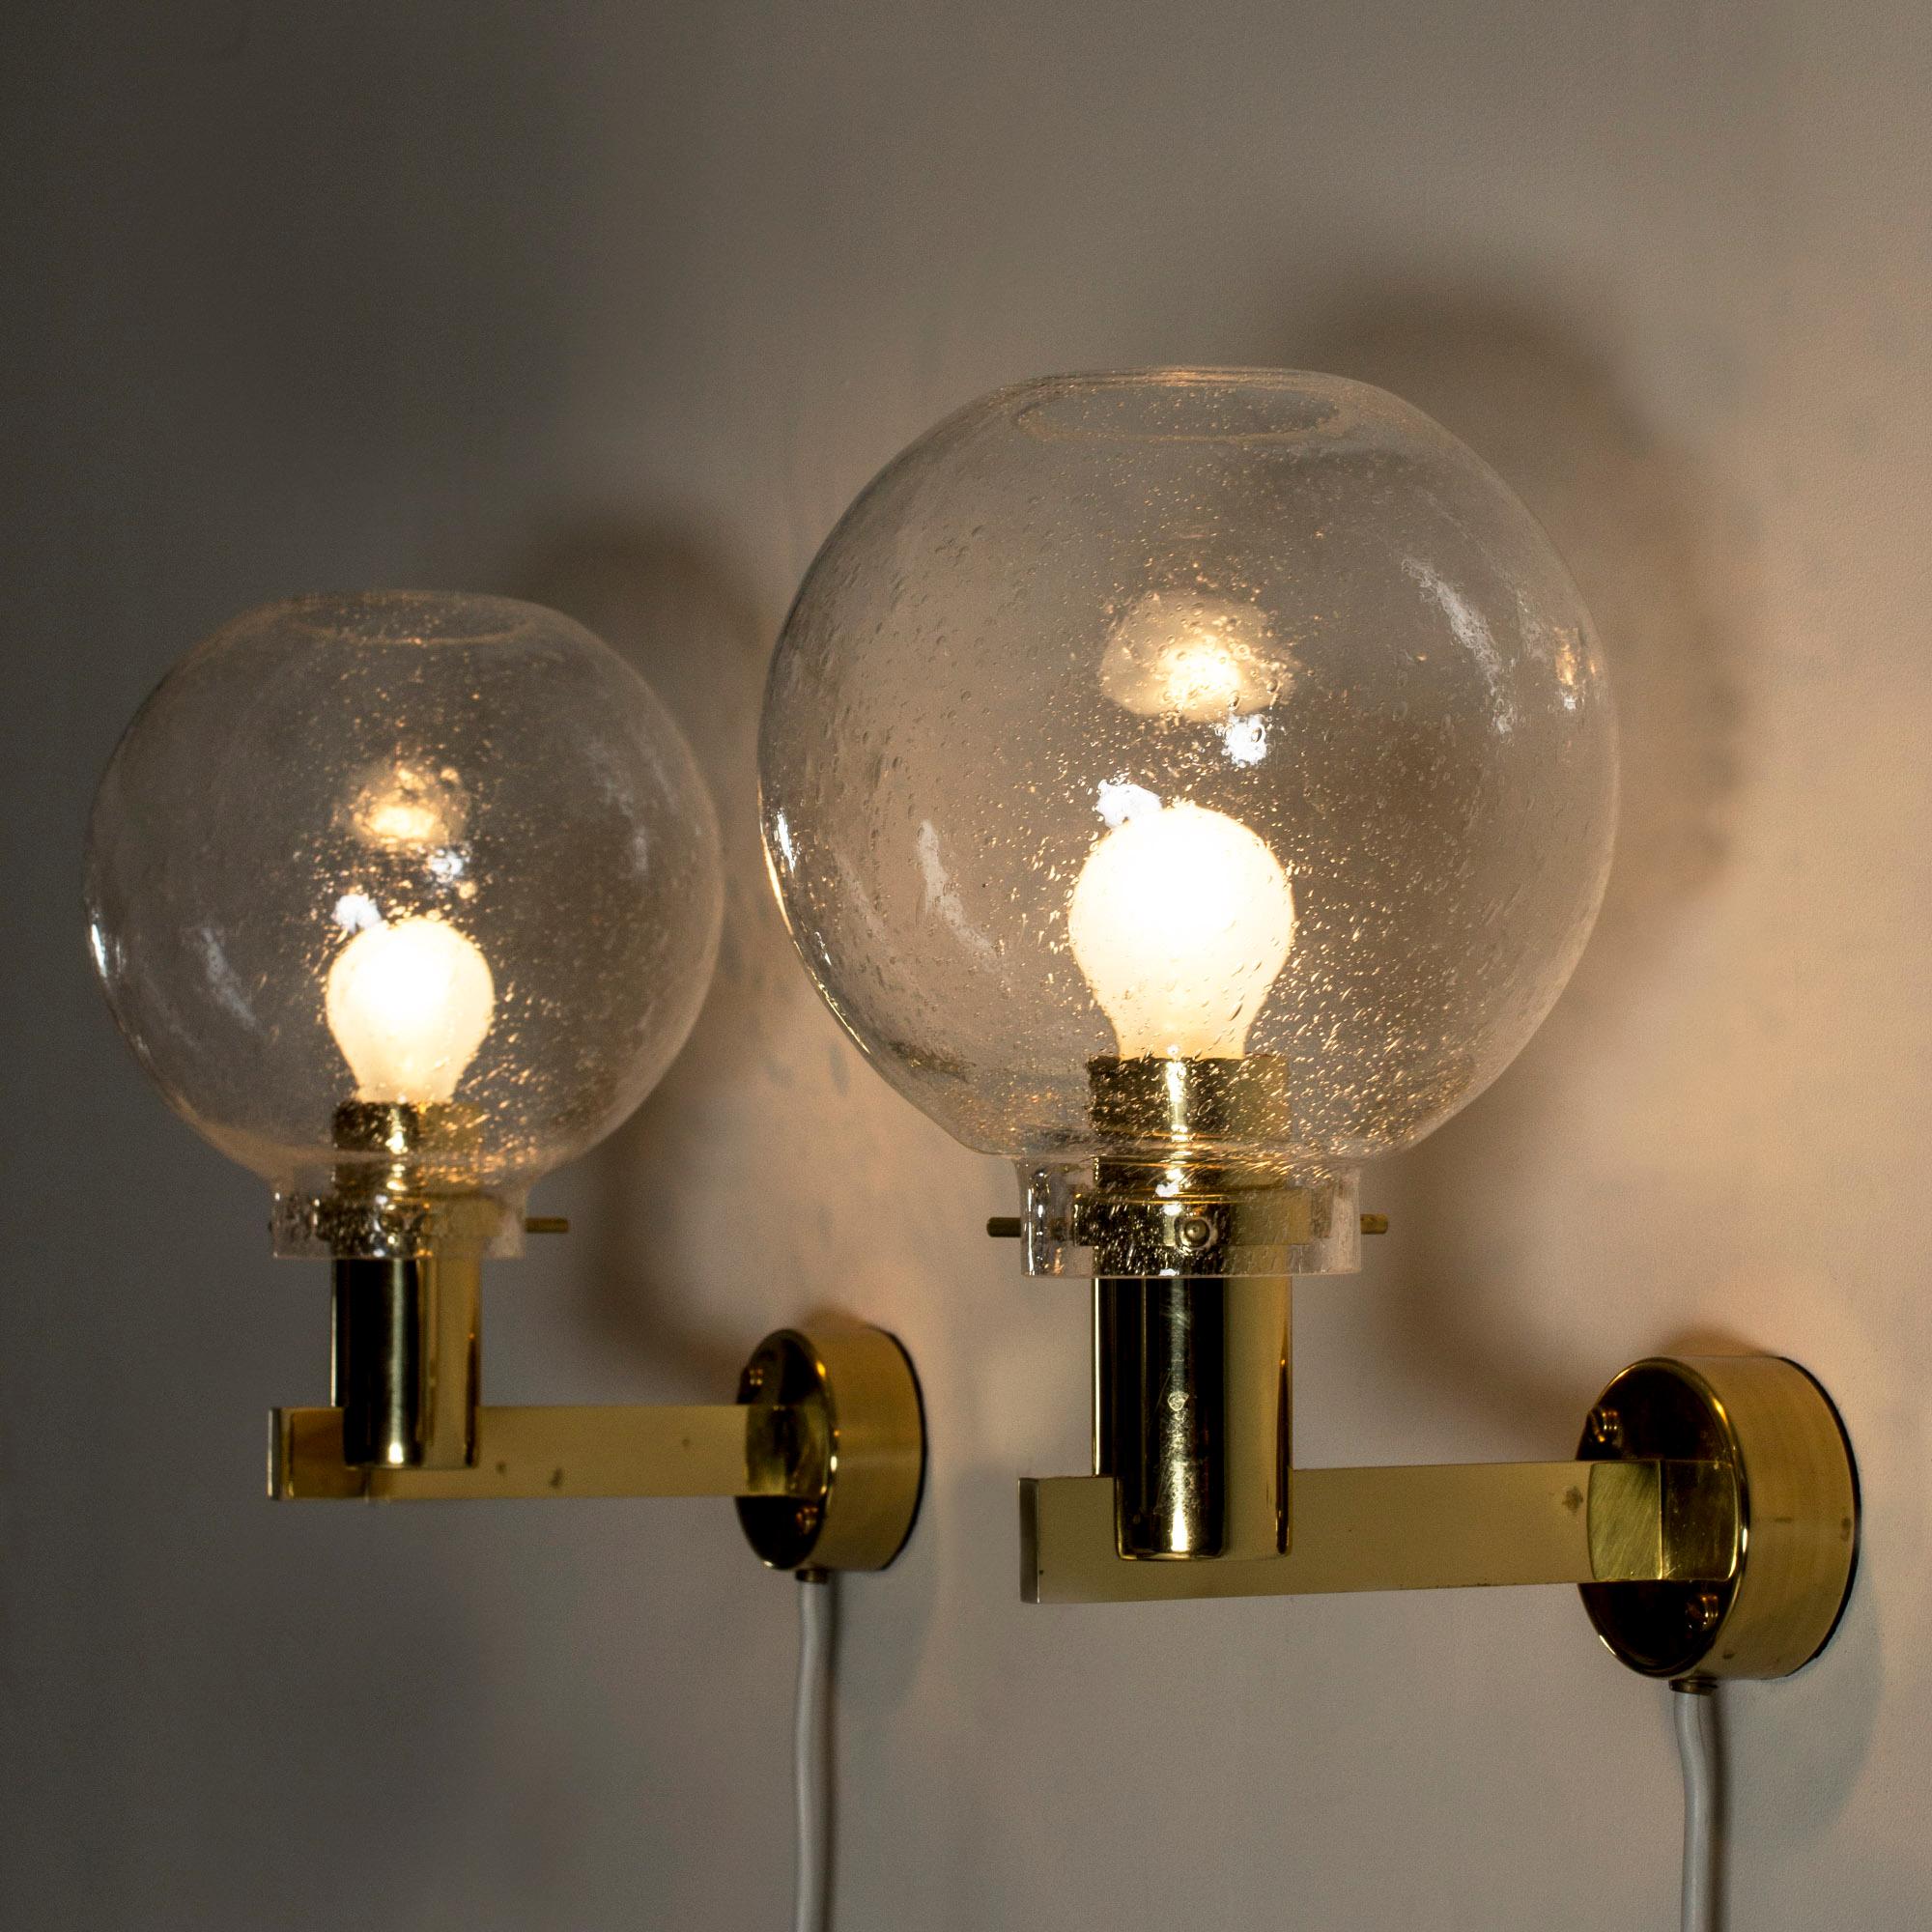 Pair of wall lamps by Hans-Agne Jakobsson, with brass frames and large glass shades. The angular brass forms contrasts nicely with the clear glass with air bubbles caught inside.